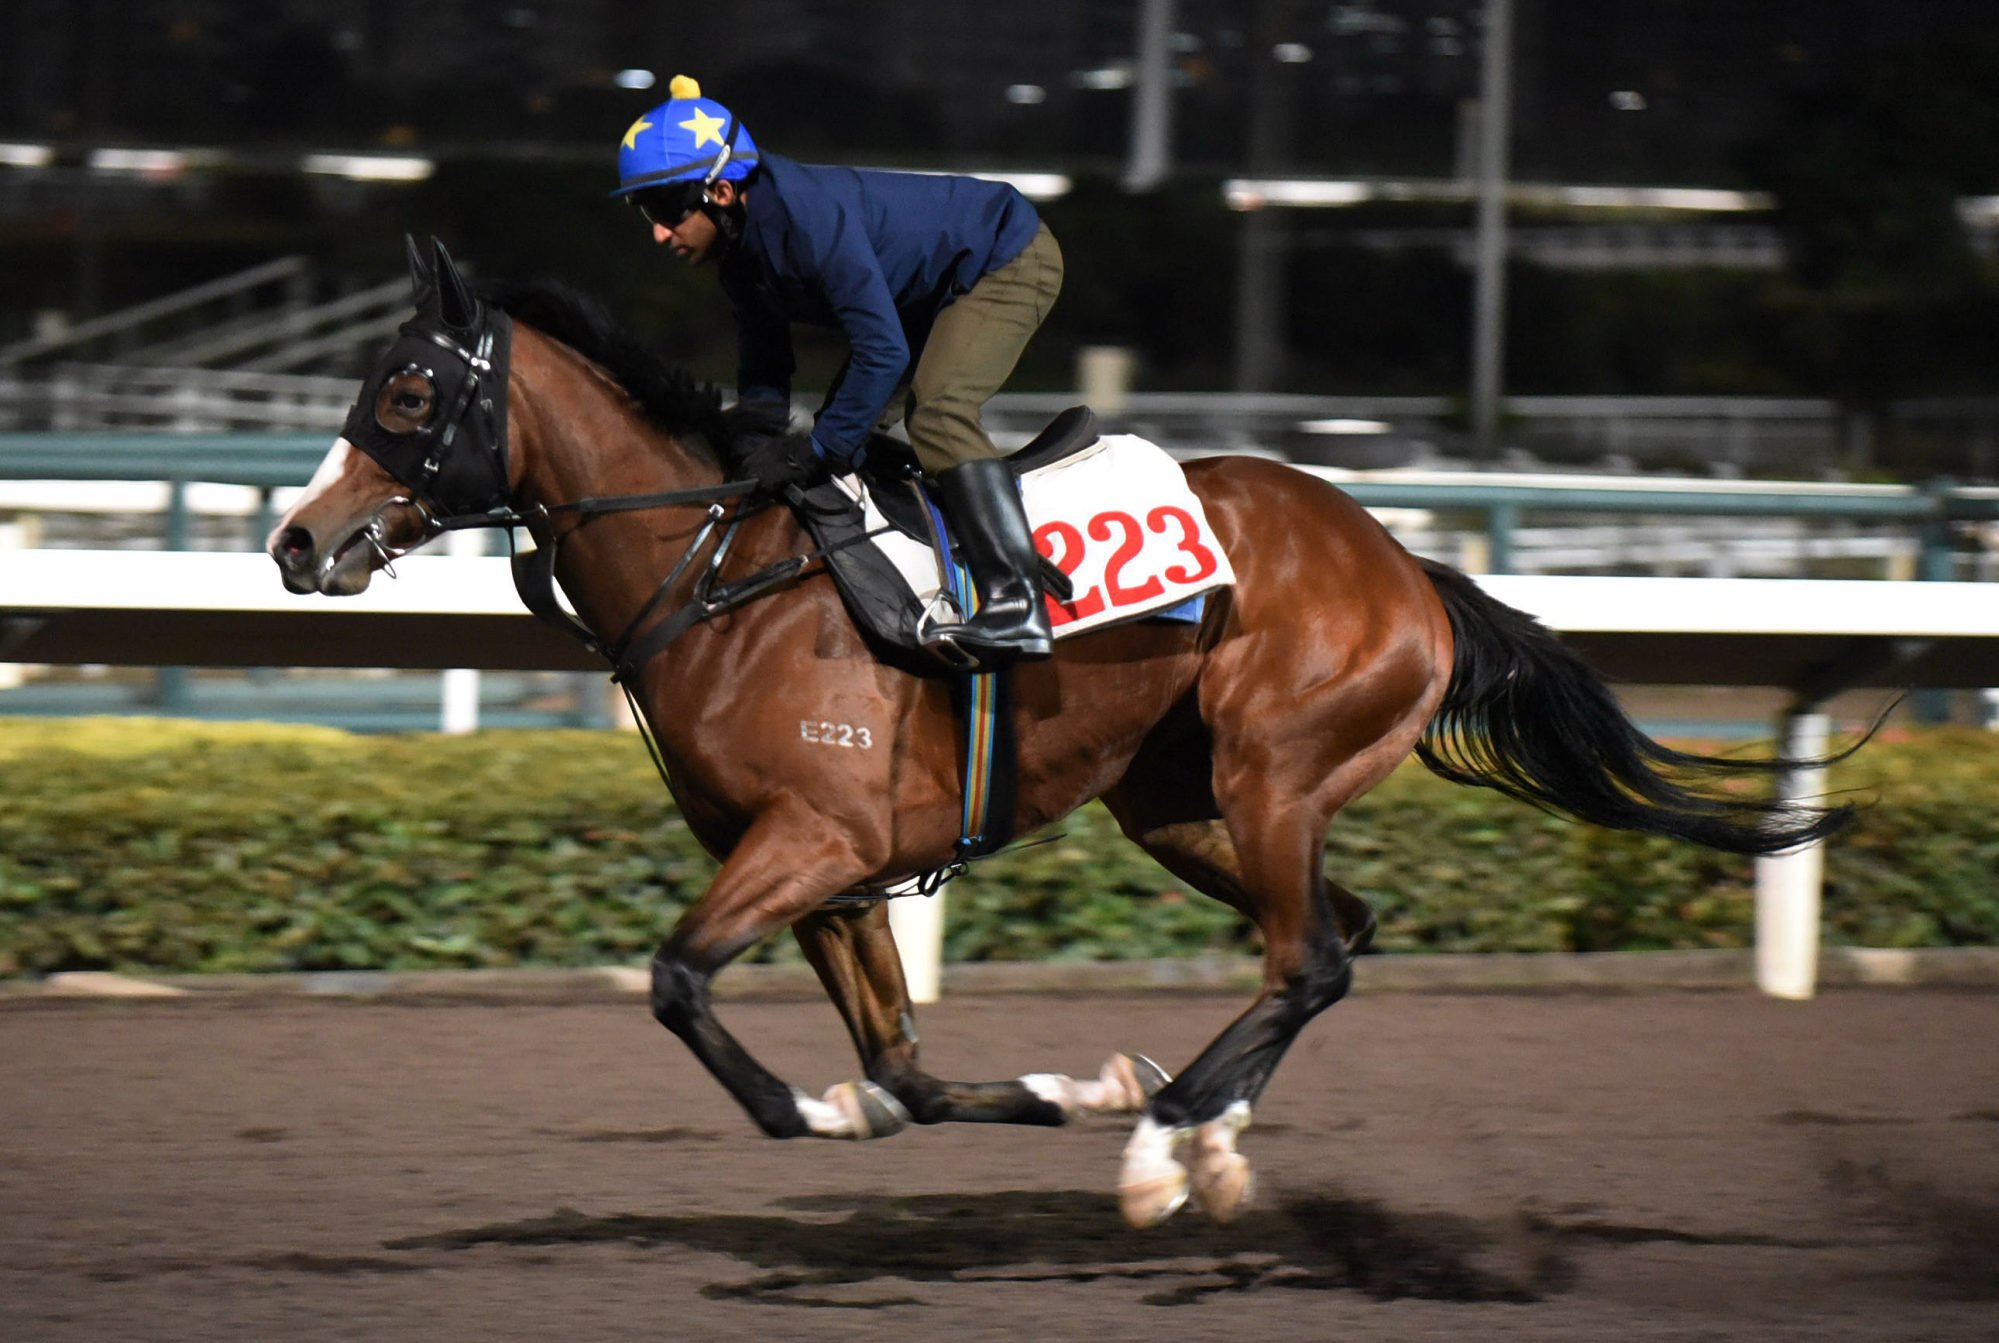 Stoicism gallops on the all-weather track at Sha Tin on Monday morning.